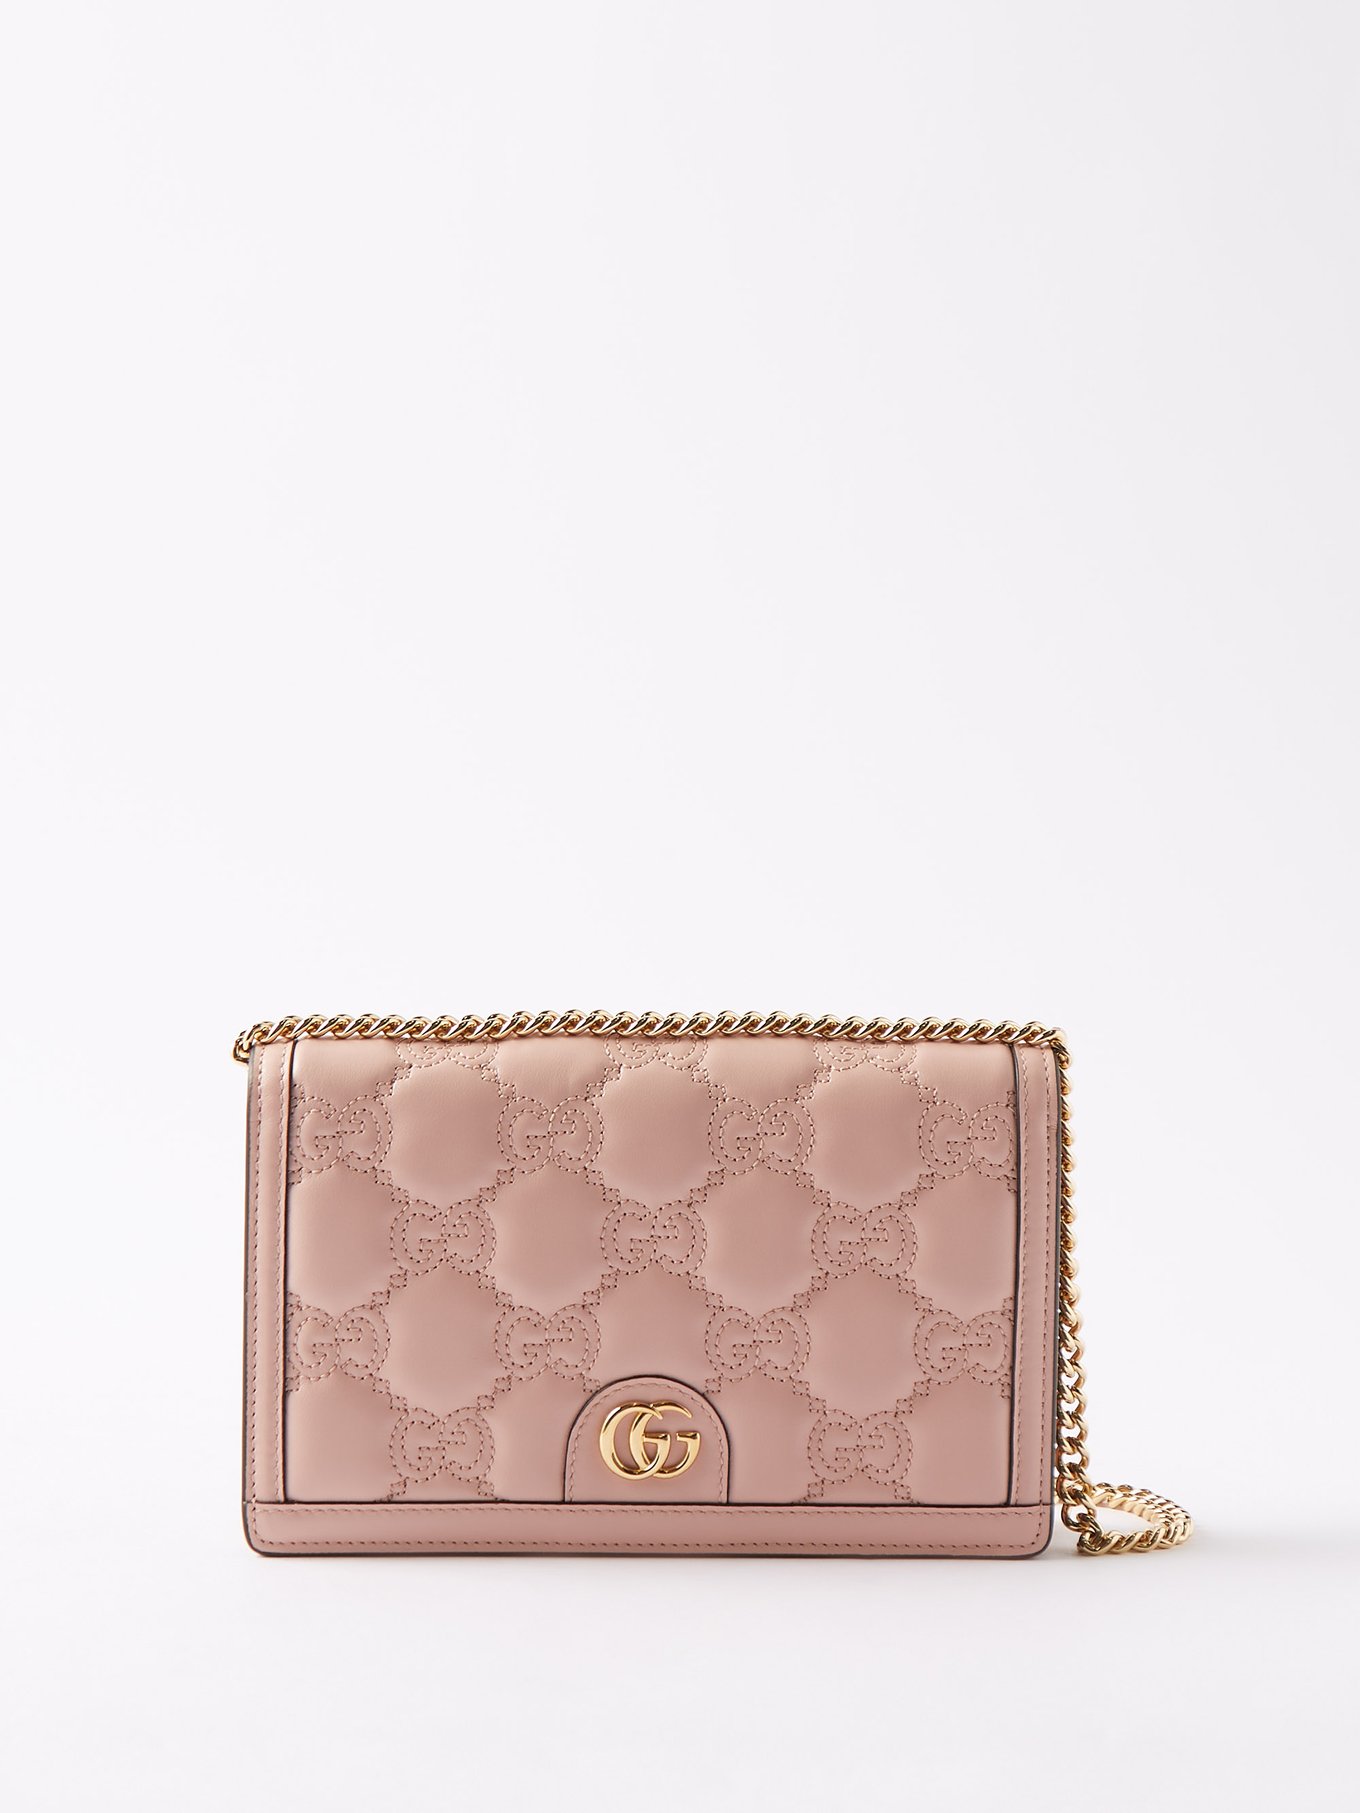 GUCCI  From Current Collection. Pale pink matelassé leather Gucci